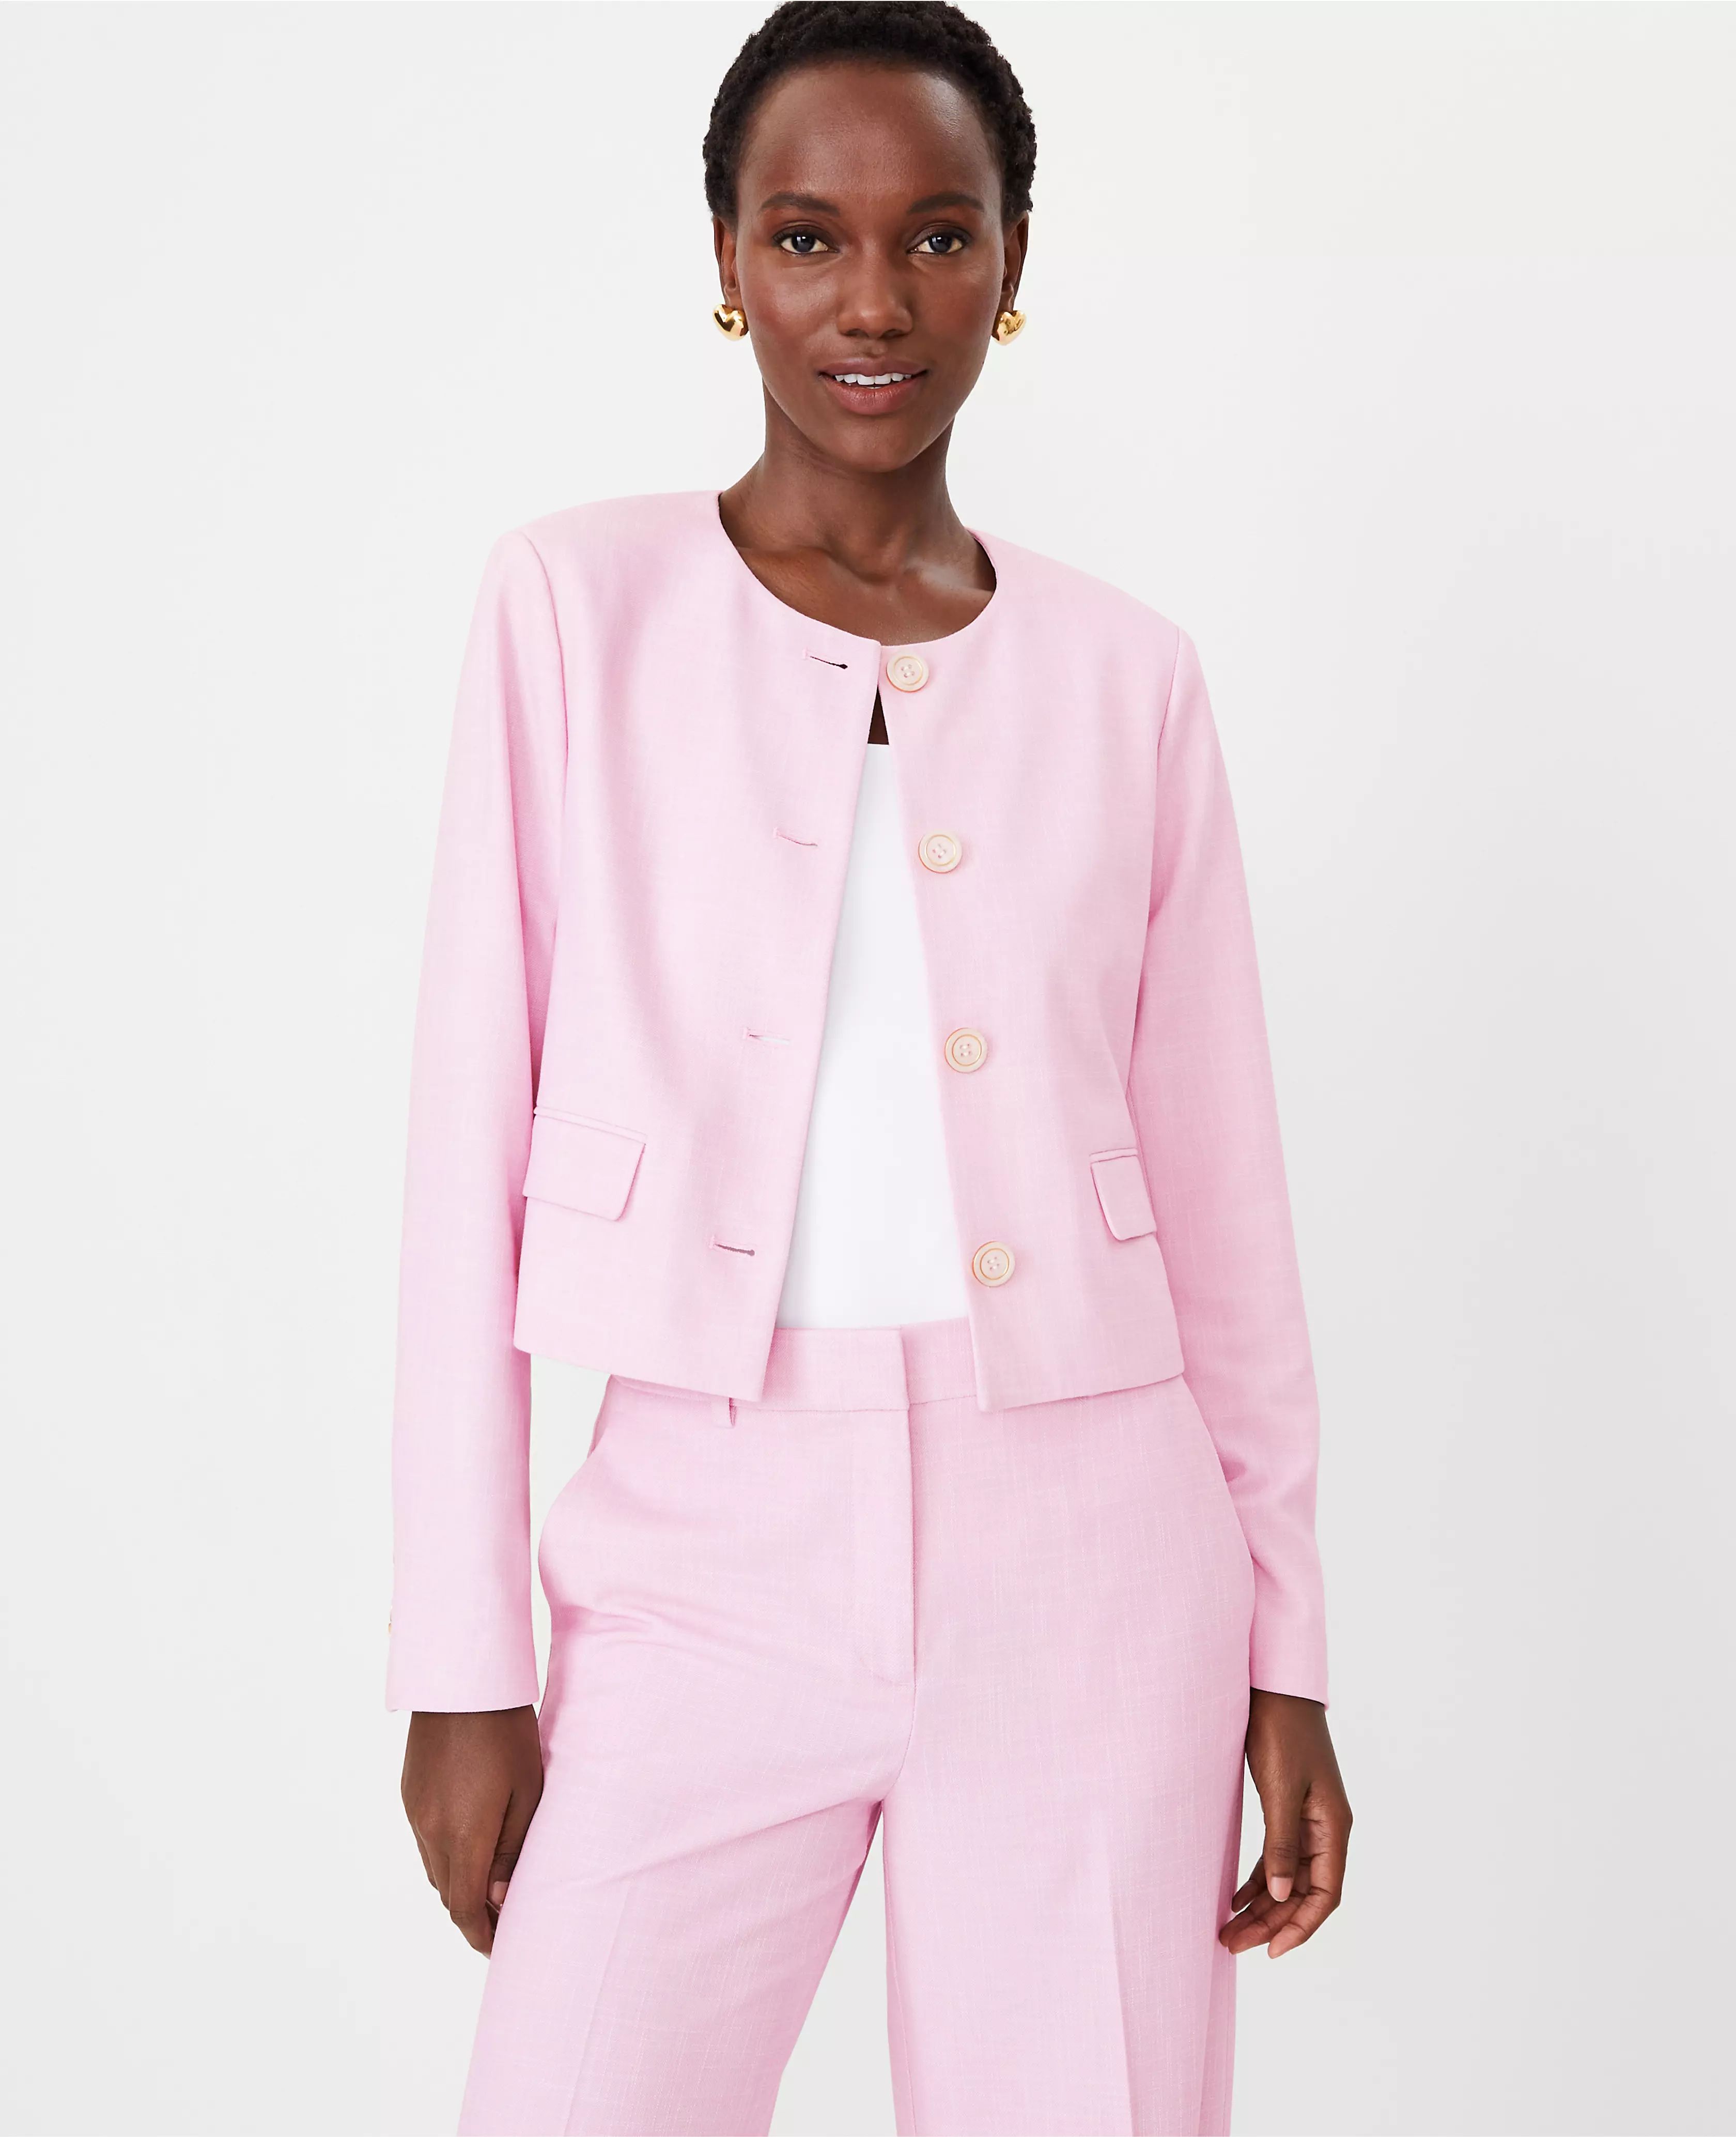 The Crew Neck Jacket in Cross Weave | Ann Taylor (US)